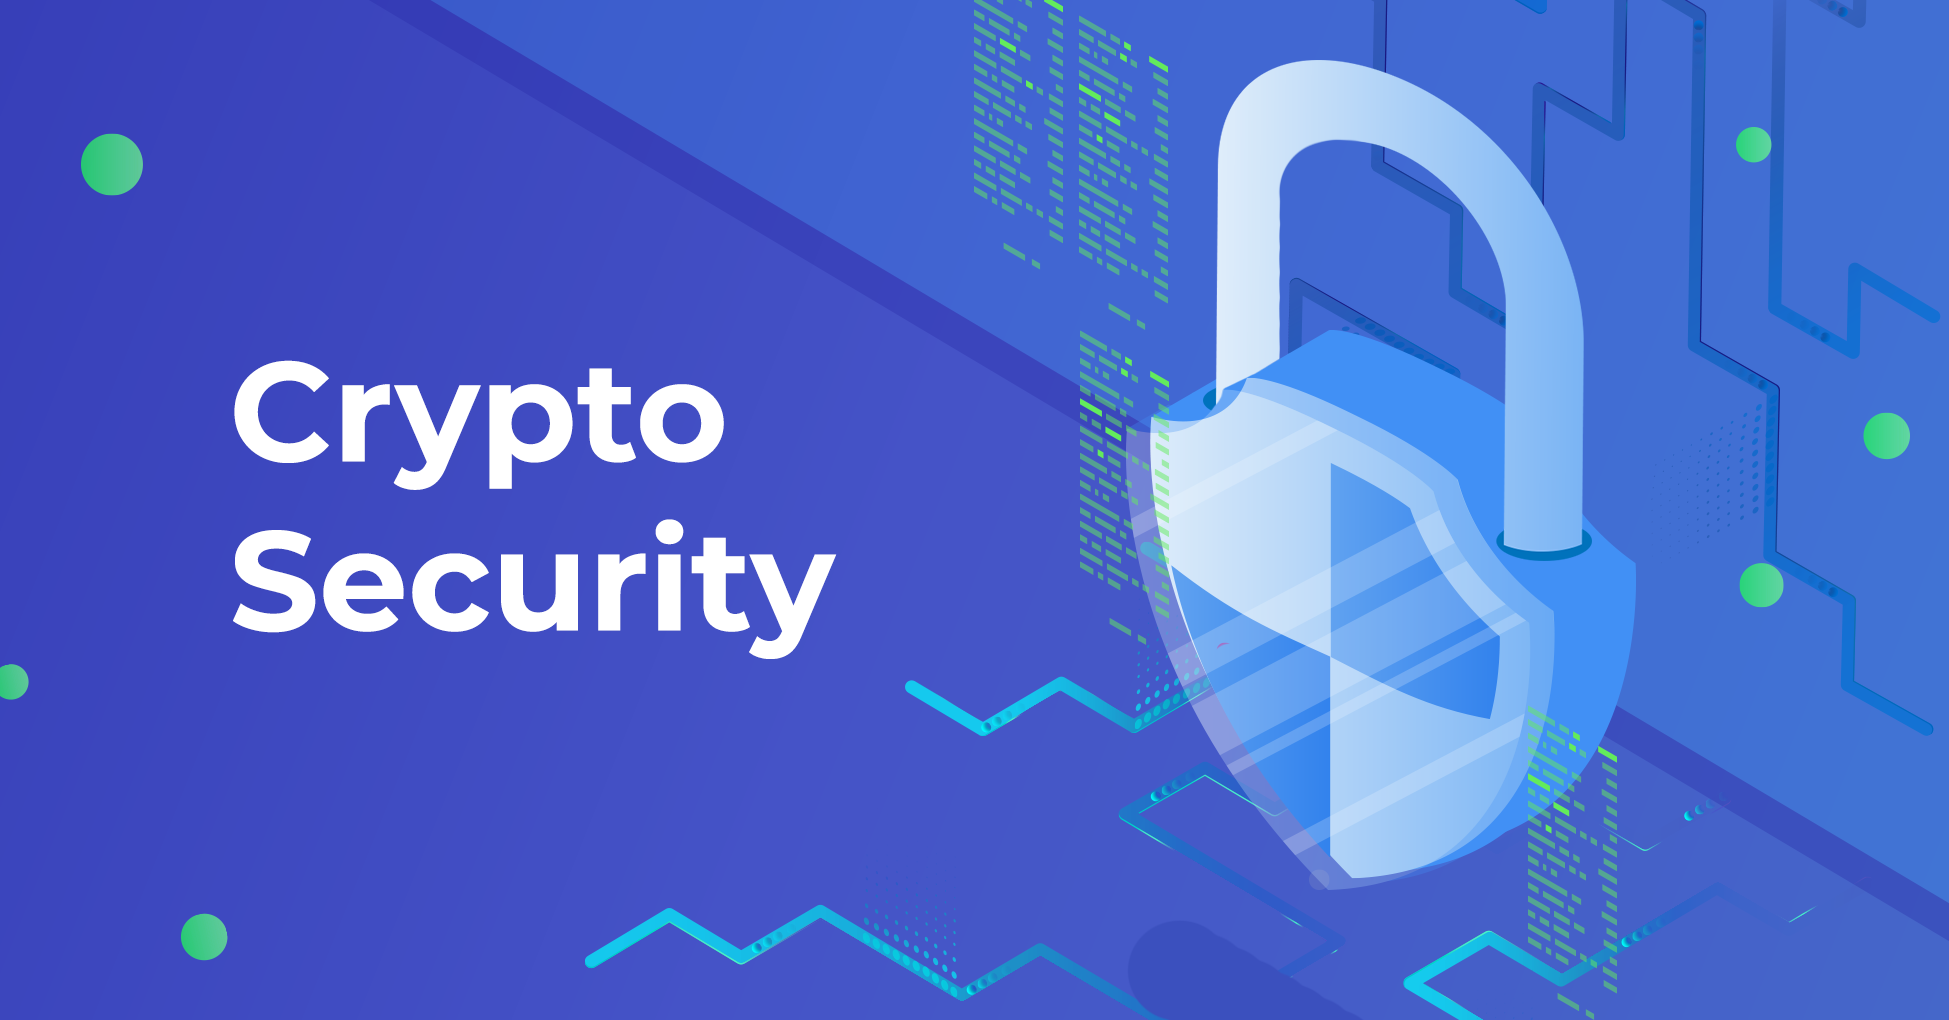 New Crypto Security Solution Protects Bitcoin, Other Digital Assets From Theft